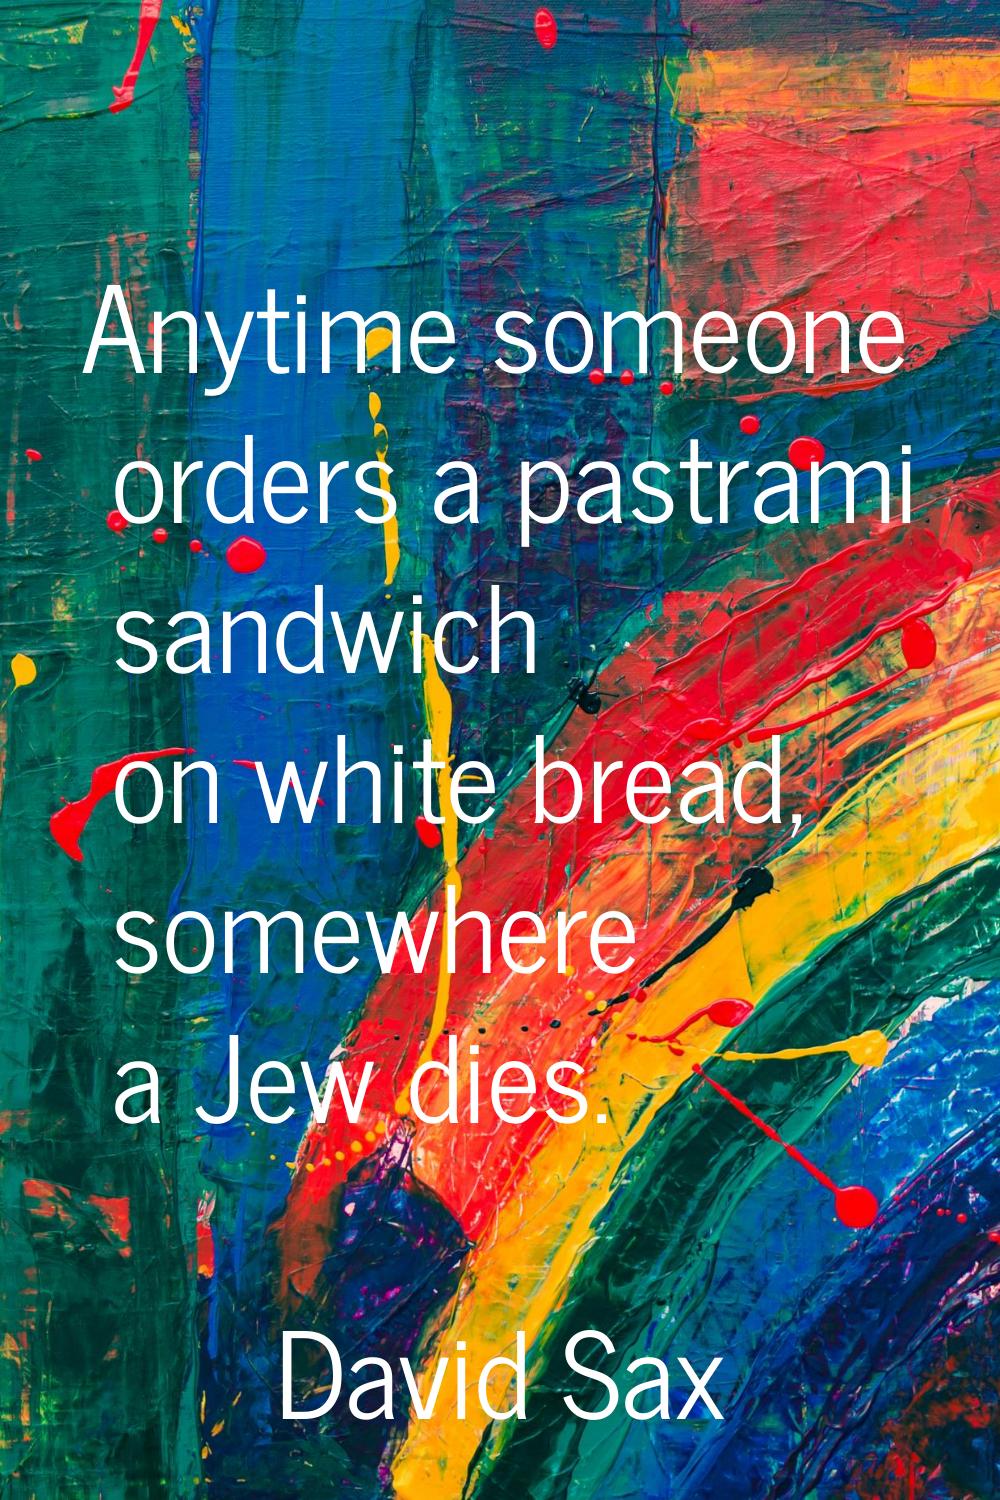 Anytime someone orders a pastrami sandwich on white bread, somewhere a Jew dies.